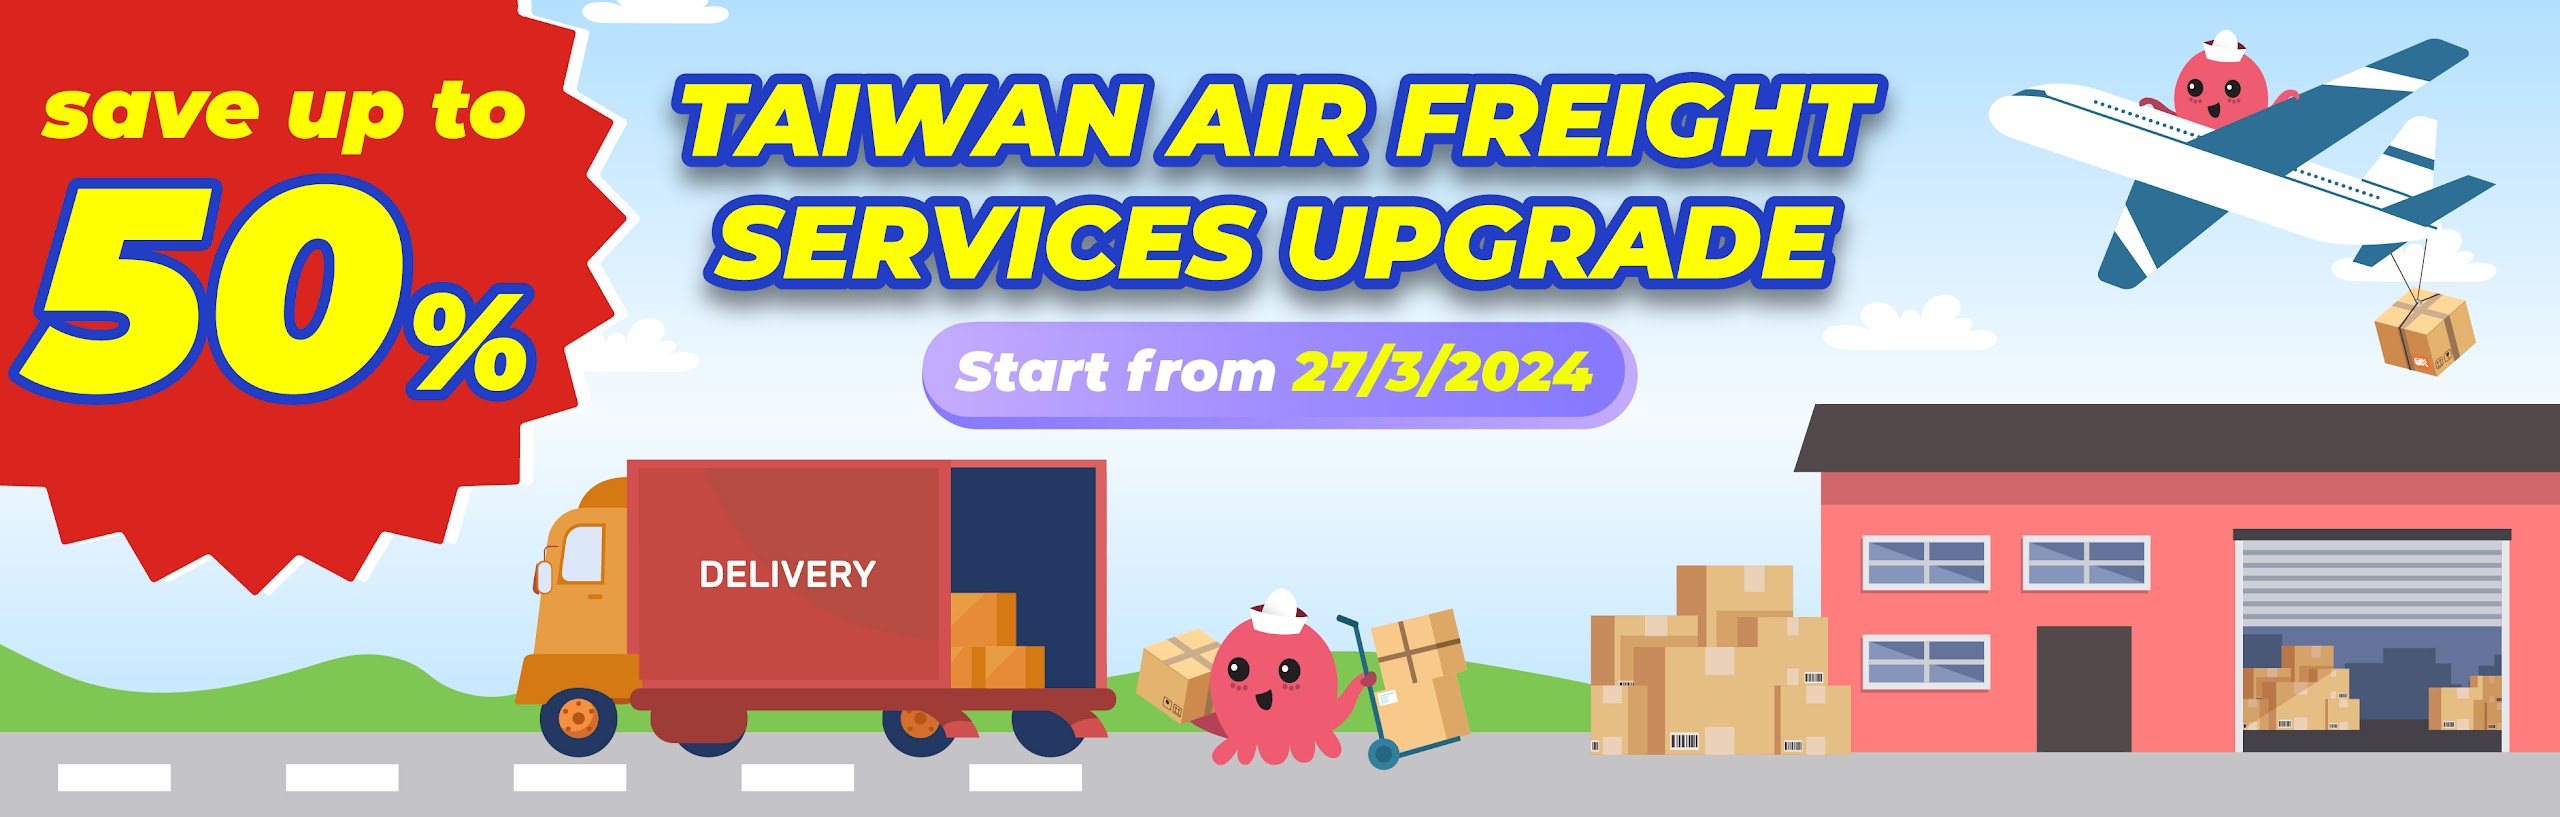 Taiwan Air Freight Service and System Upgrade